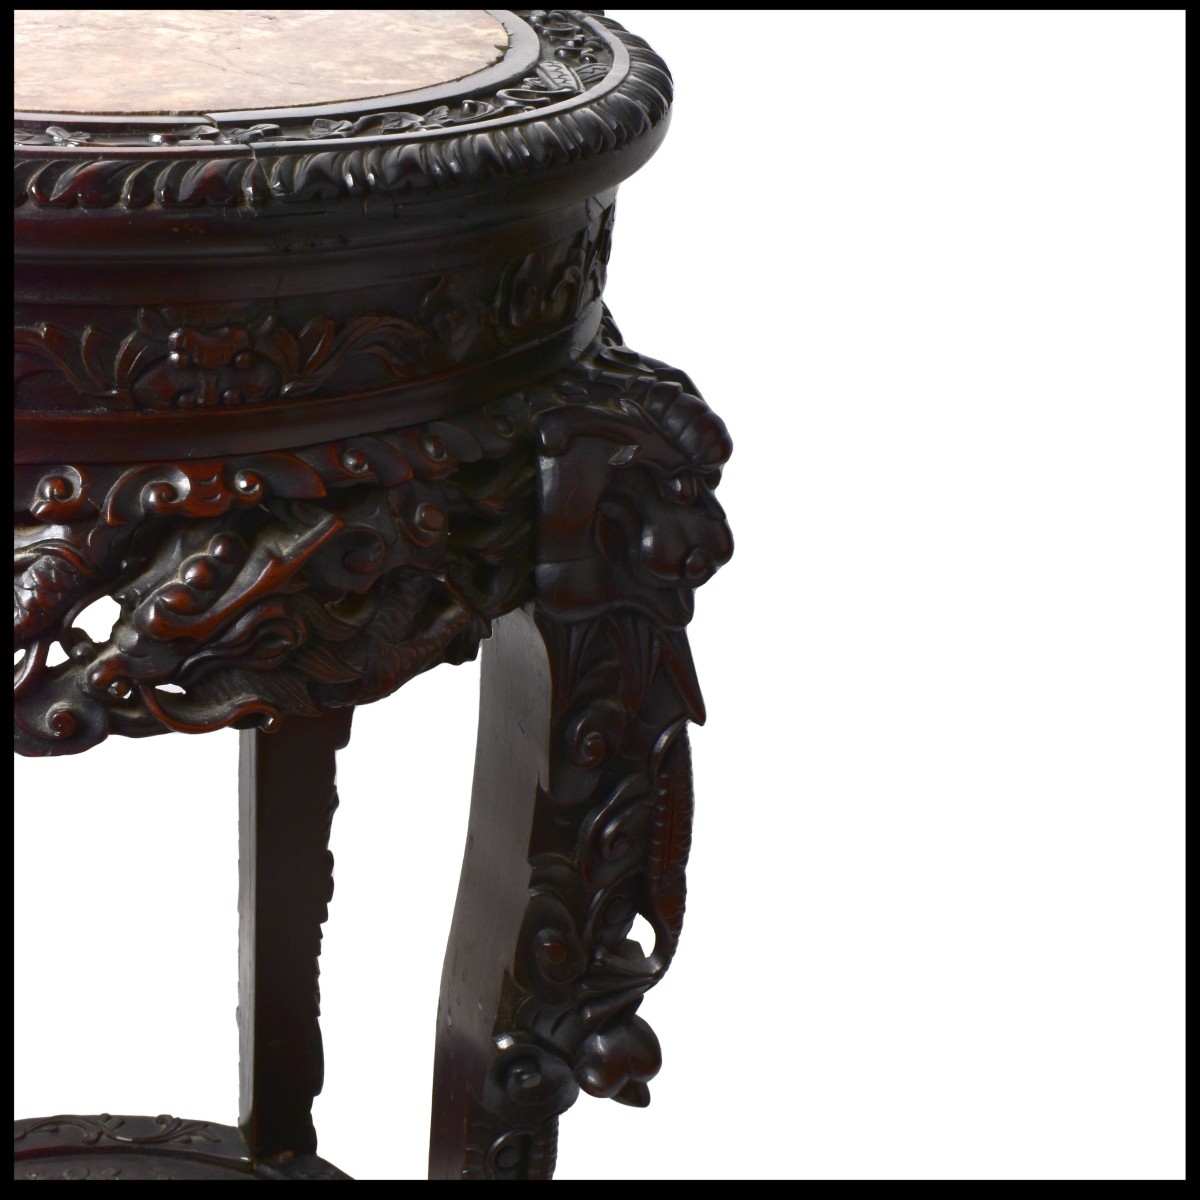 Chinese Carved Hardwood Marble Top Stand